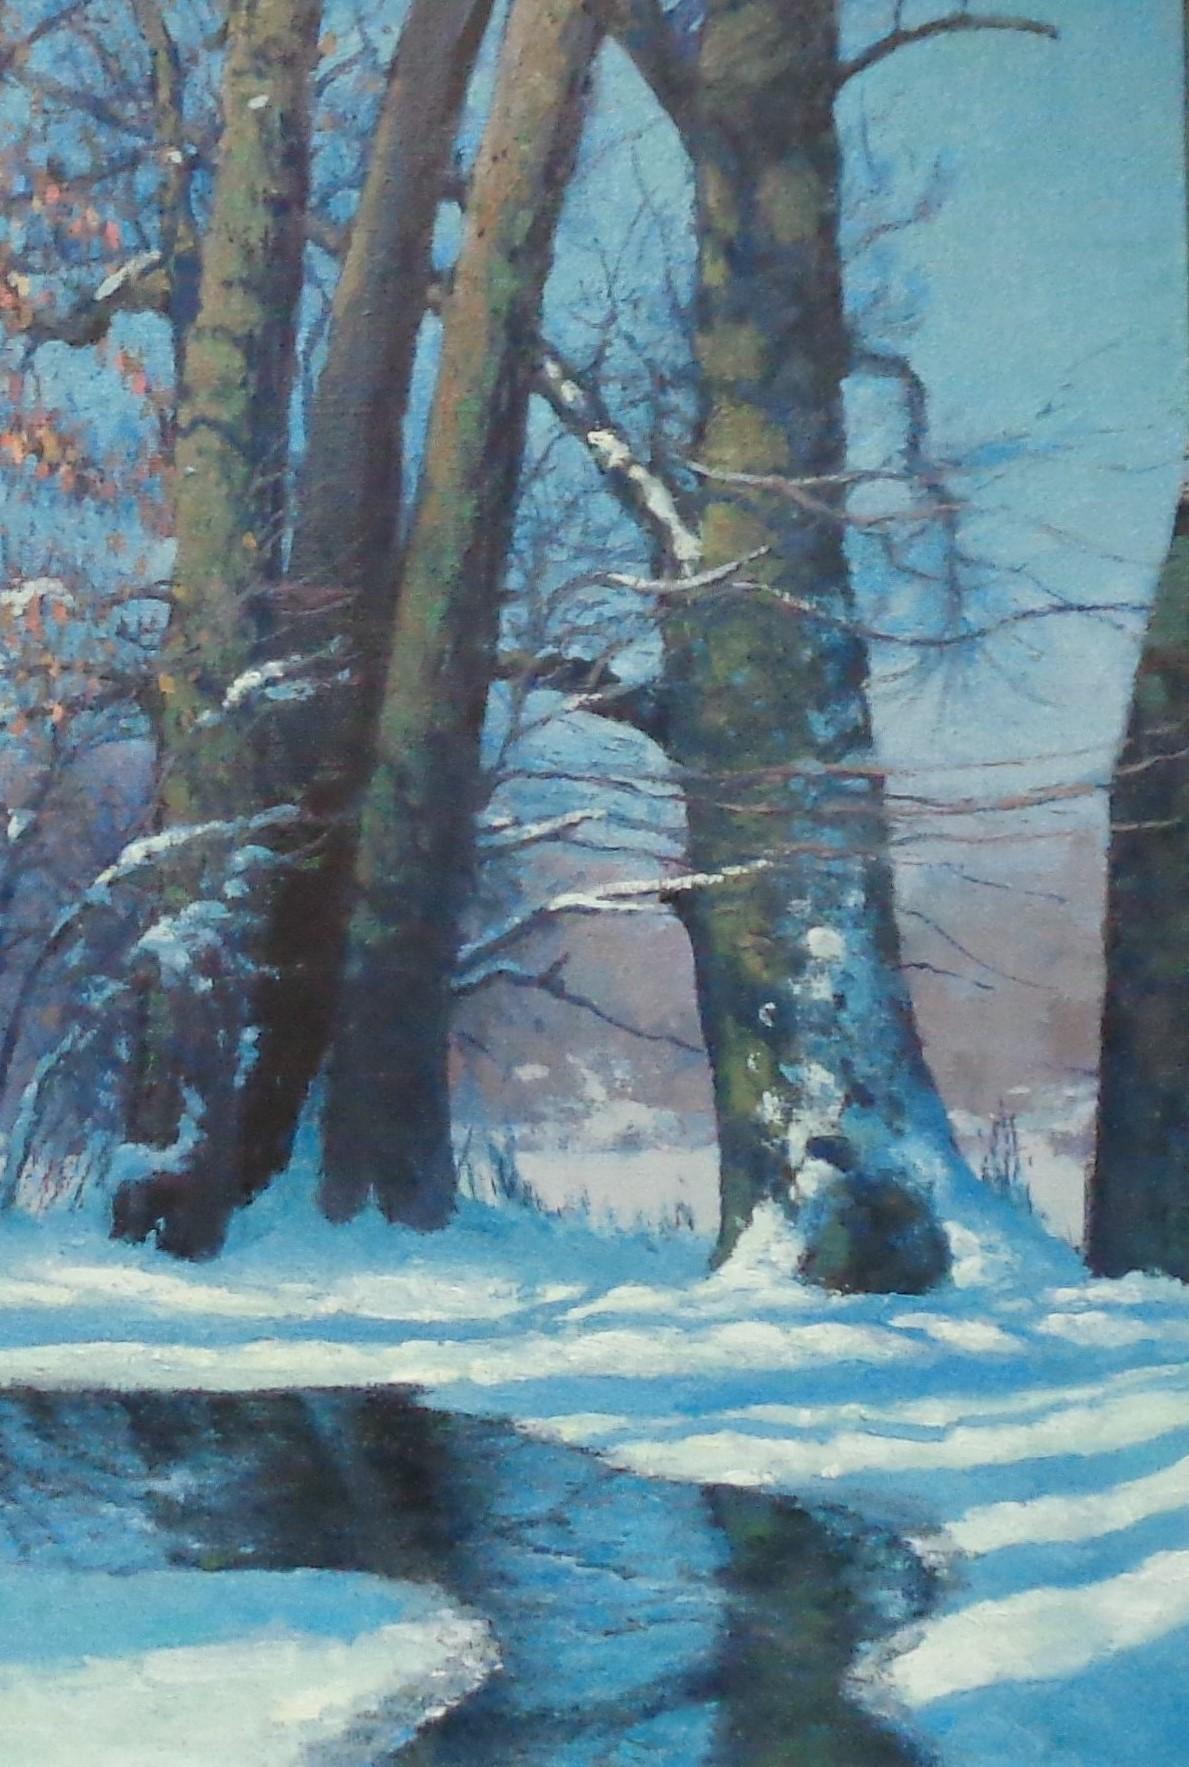  Winter Snow Scene Contemporary Landscape Oil Painting by Michael Budden For Sale 4